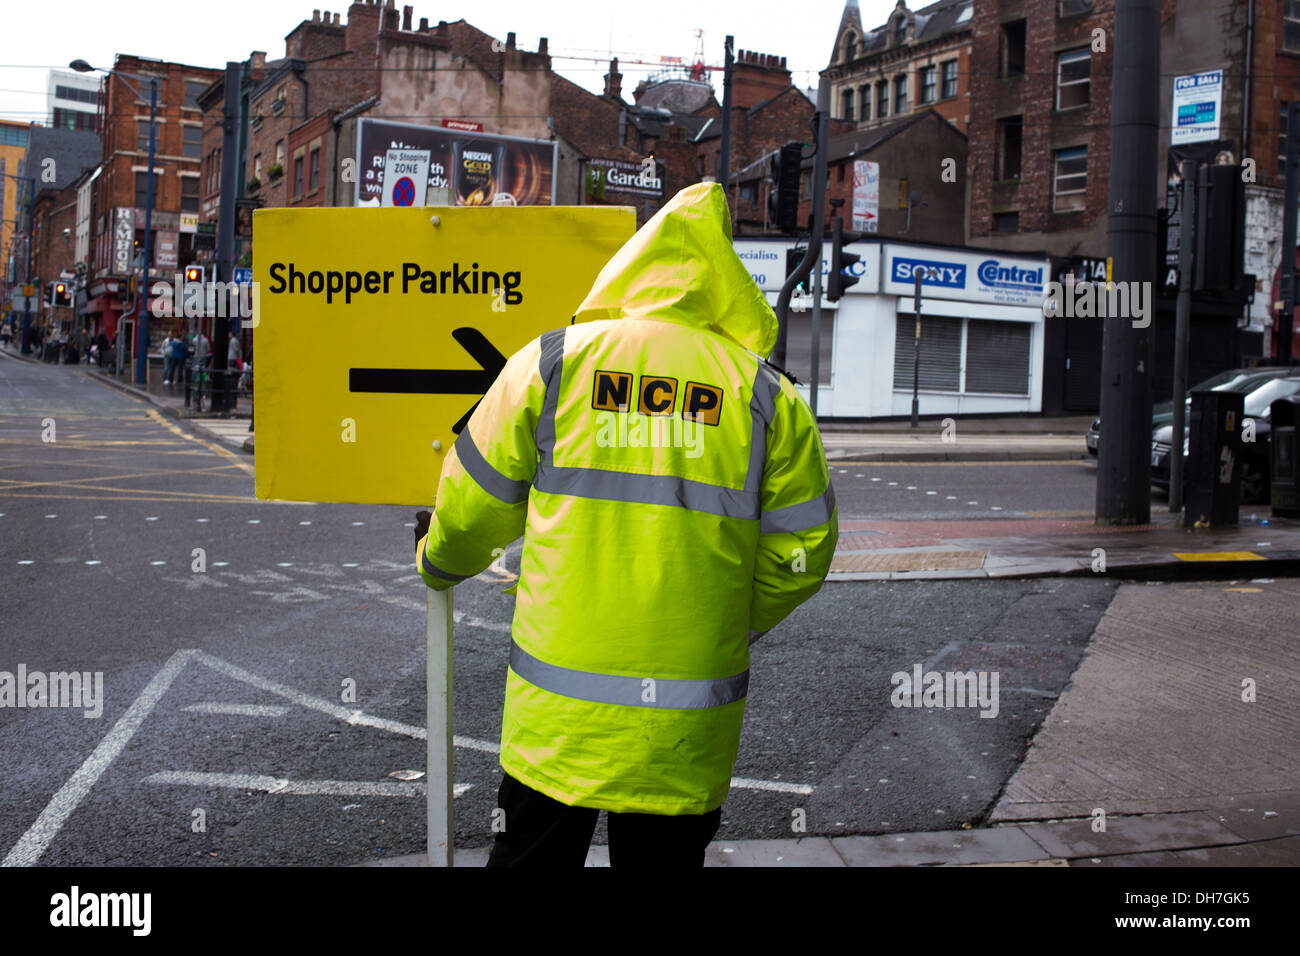 An NCP parking attendent directs drivers to shopper parking in a multi storey car park in Manchester City Centre Stock Photo